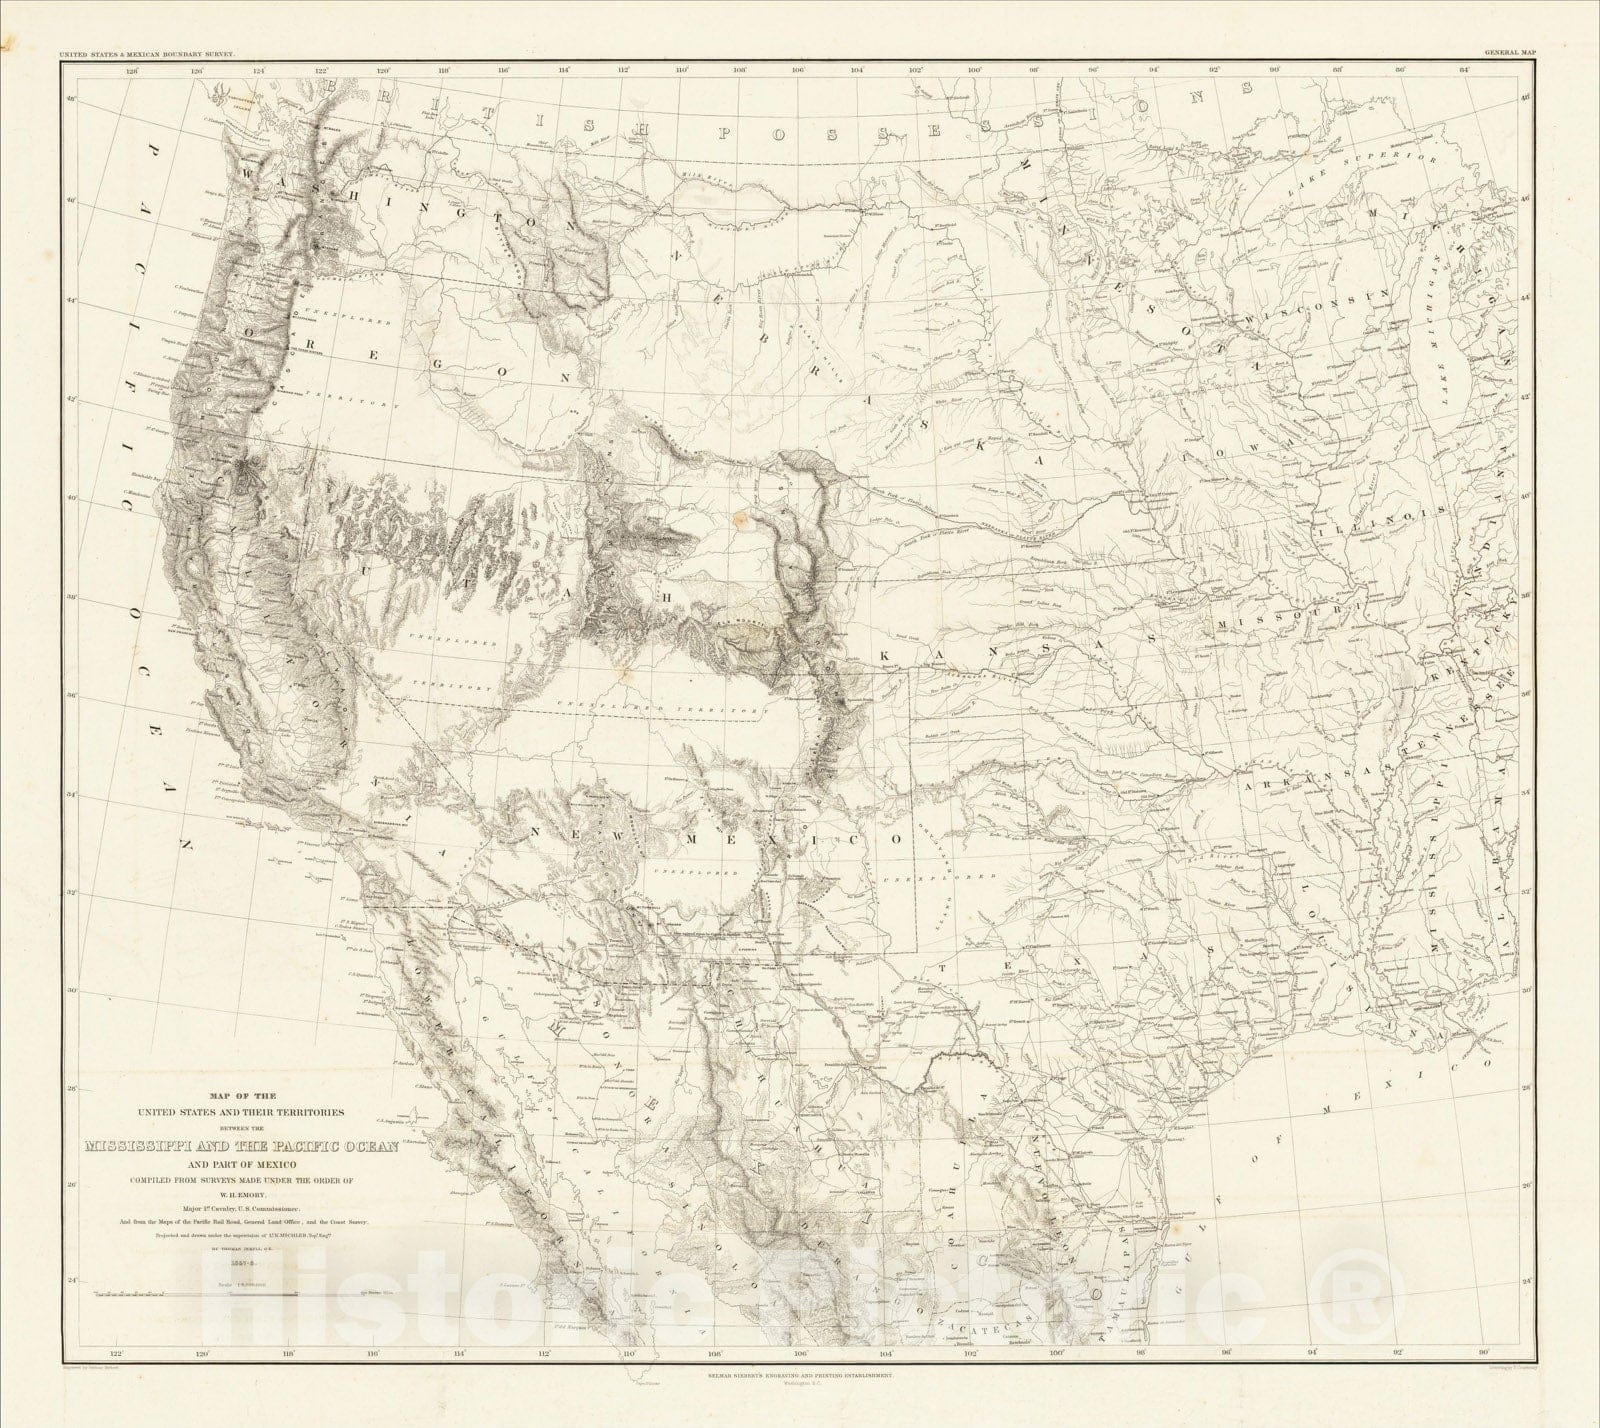 Historic Map : Map of the United States and Their Territories Between the Mississippi and the Pacific Ocean and Part of Mexico, W.H. Emory, 1857-8., 1858, v3, Vintage Wall Art